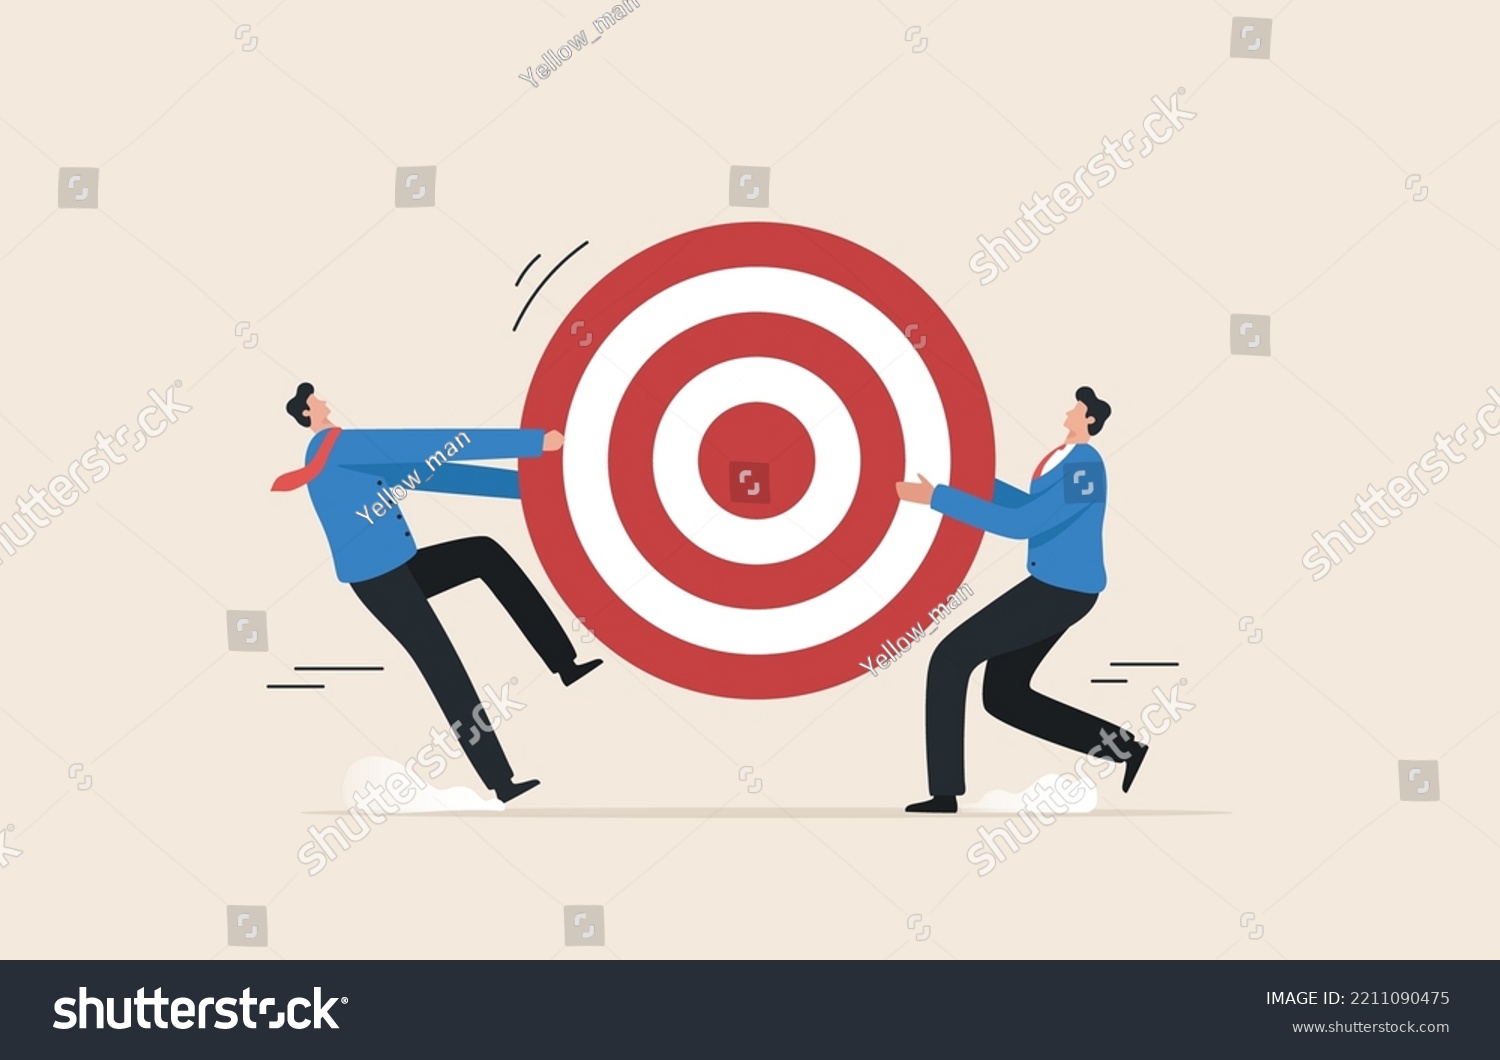 Competitive Strategies for business target. 
Compete for customers. Scramble for market share. Two businessmen fighting for a dartboard goal, target. #2211090475